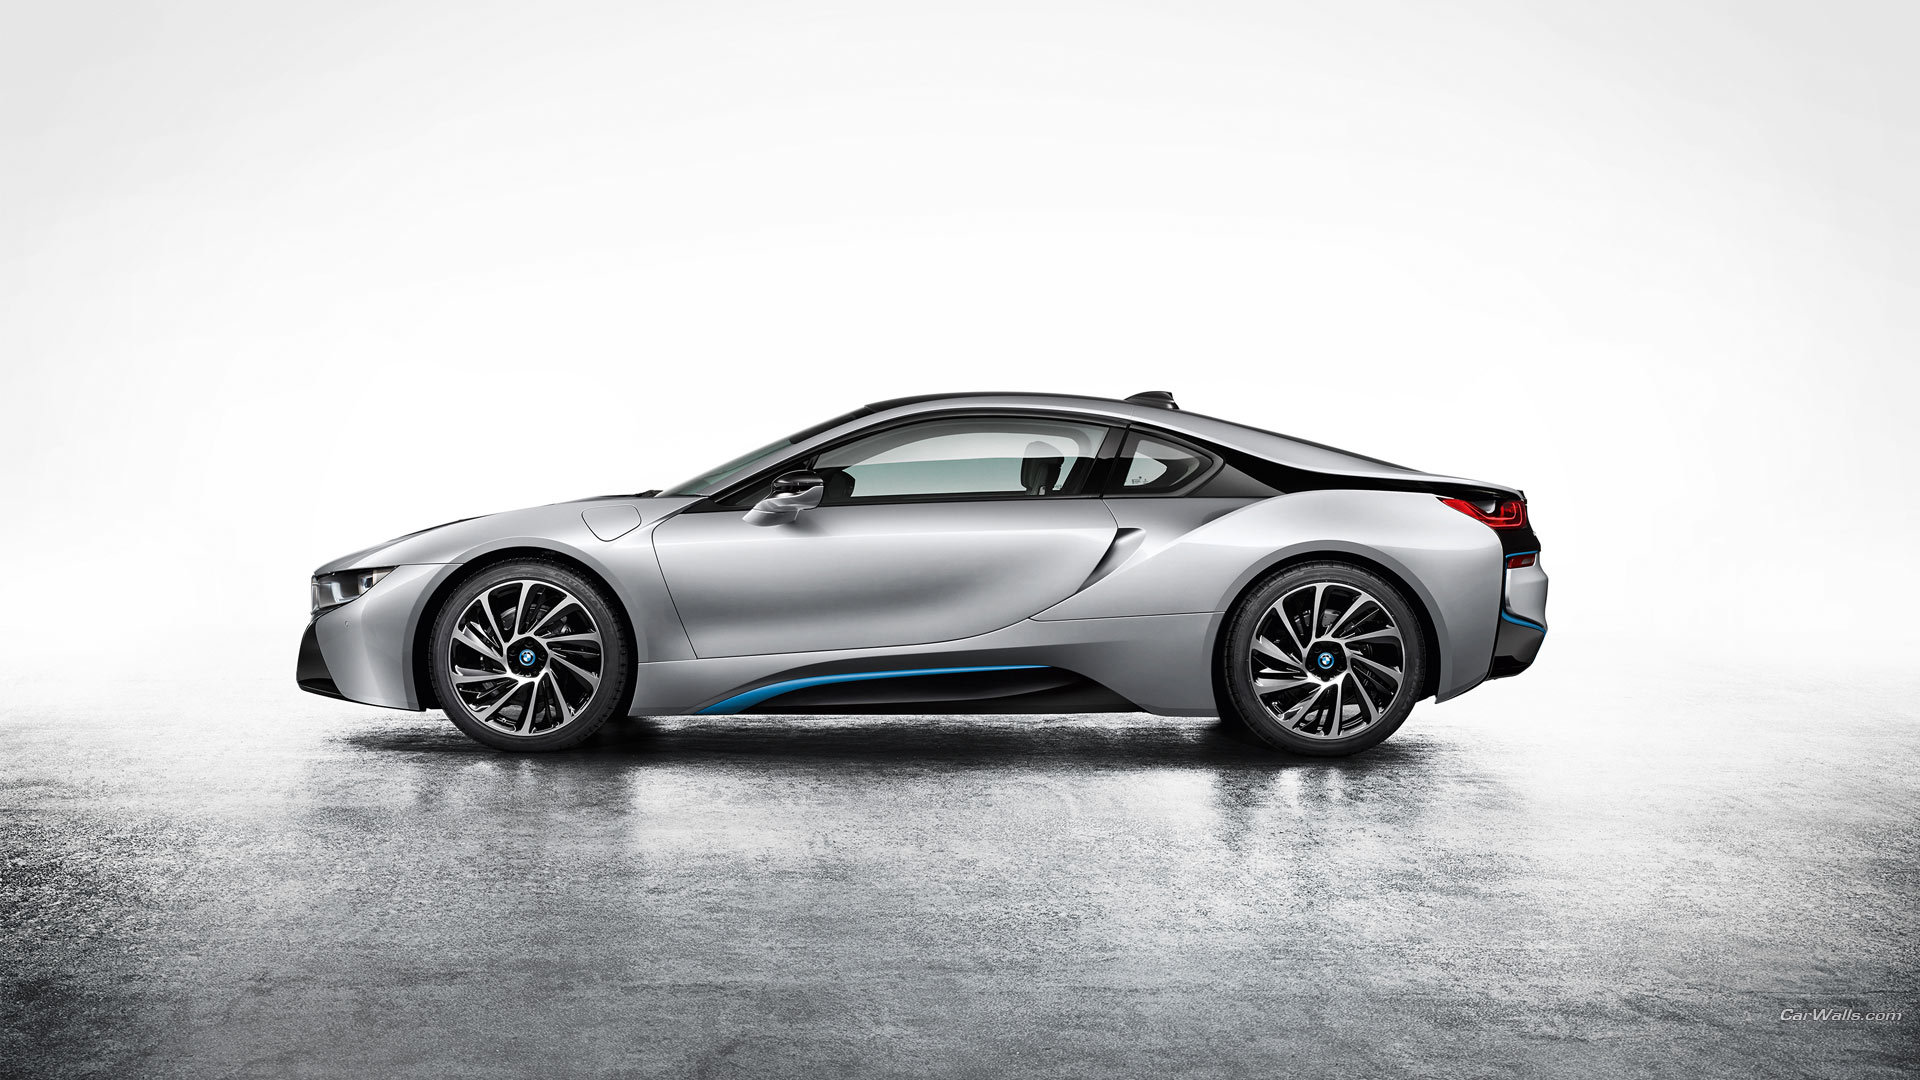 Awesome BMW I8 free wallpaper ID:126942 for hd 1920x1080 desktop